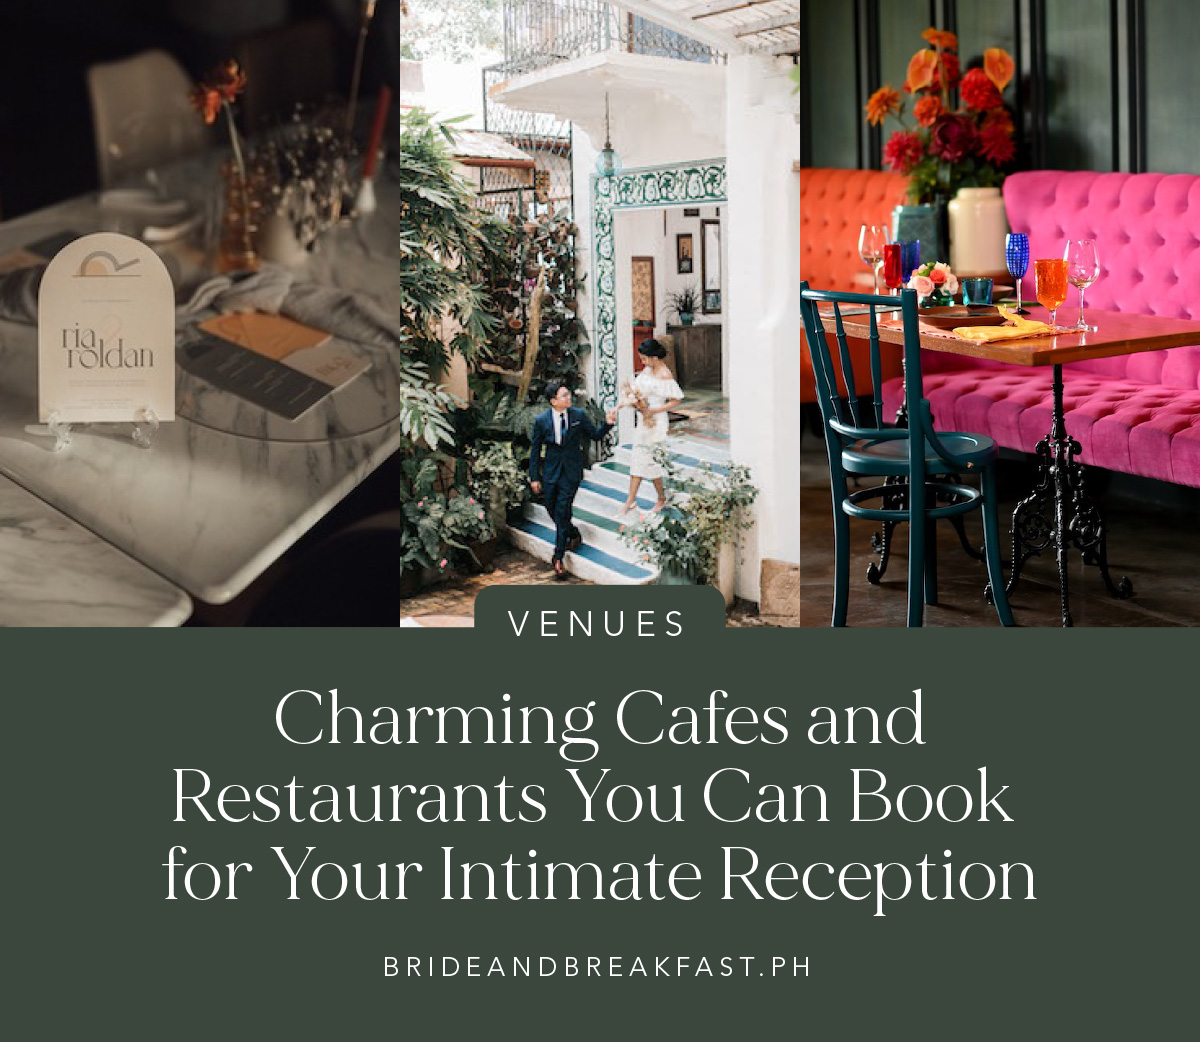 Charming Cafes and Restaurants You Can Book for Your Intimate Reception